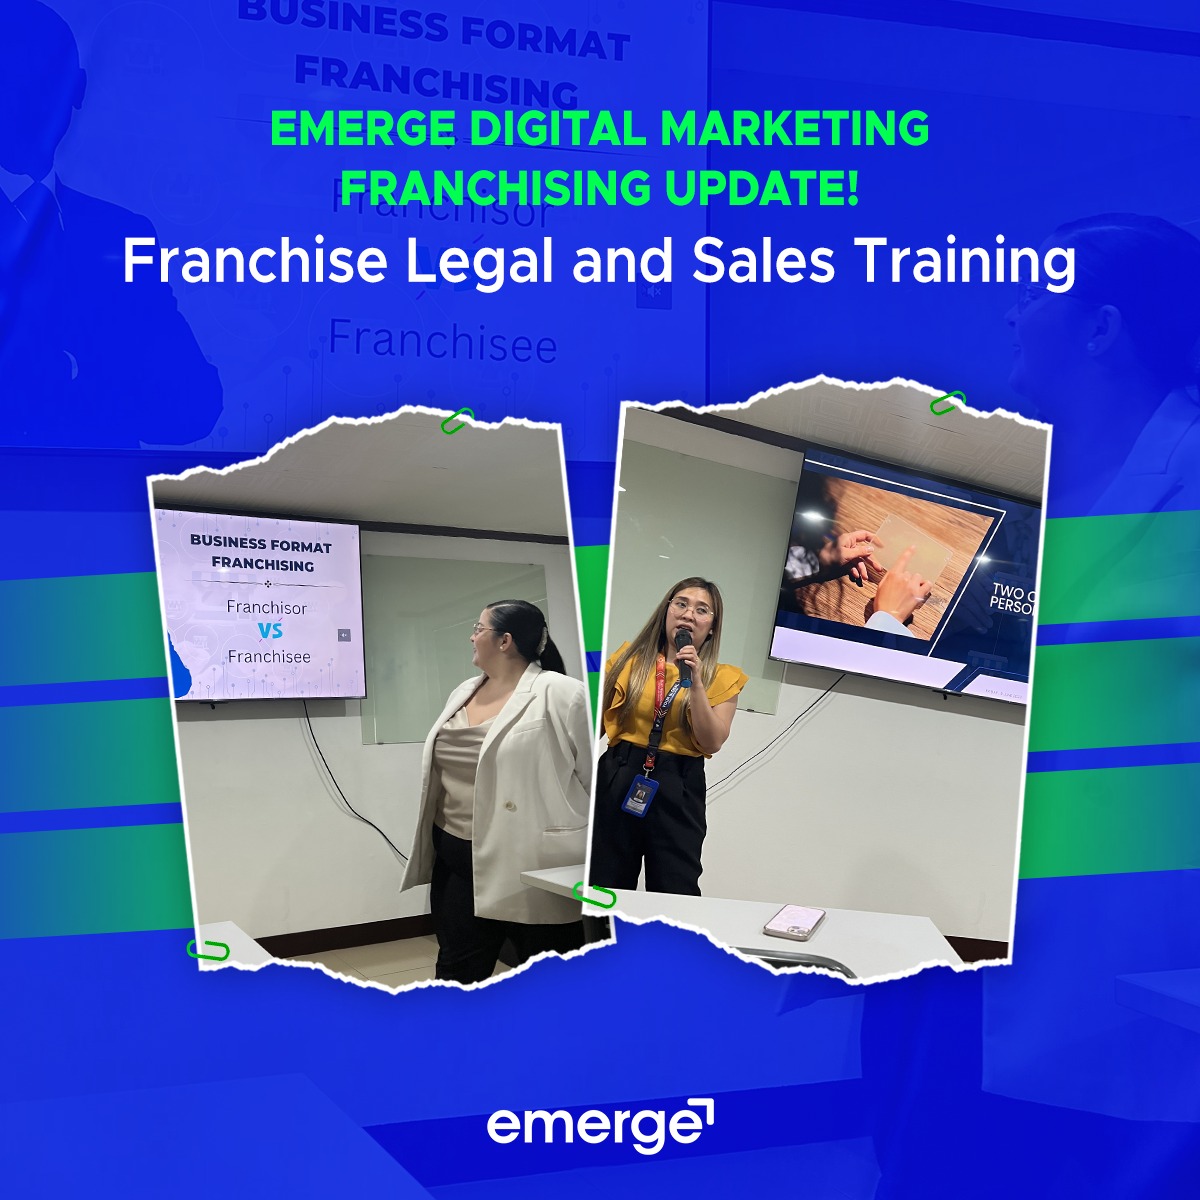 Empowering our franchising horizons!

Recently, we had the privilege of participating in a comprehensive franchise legal and sales training event alongside the visionary founders of Emerge.

#Emerge #DigitalFirst #WeAreEmerge #FranchiseTraining #EmpowerGrowth